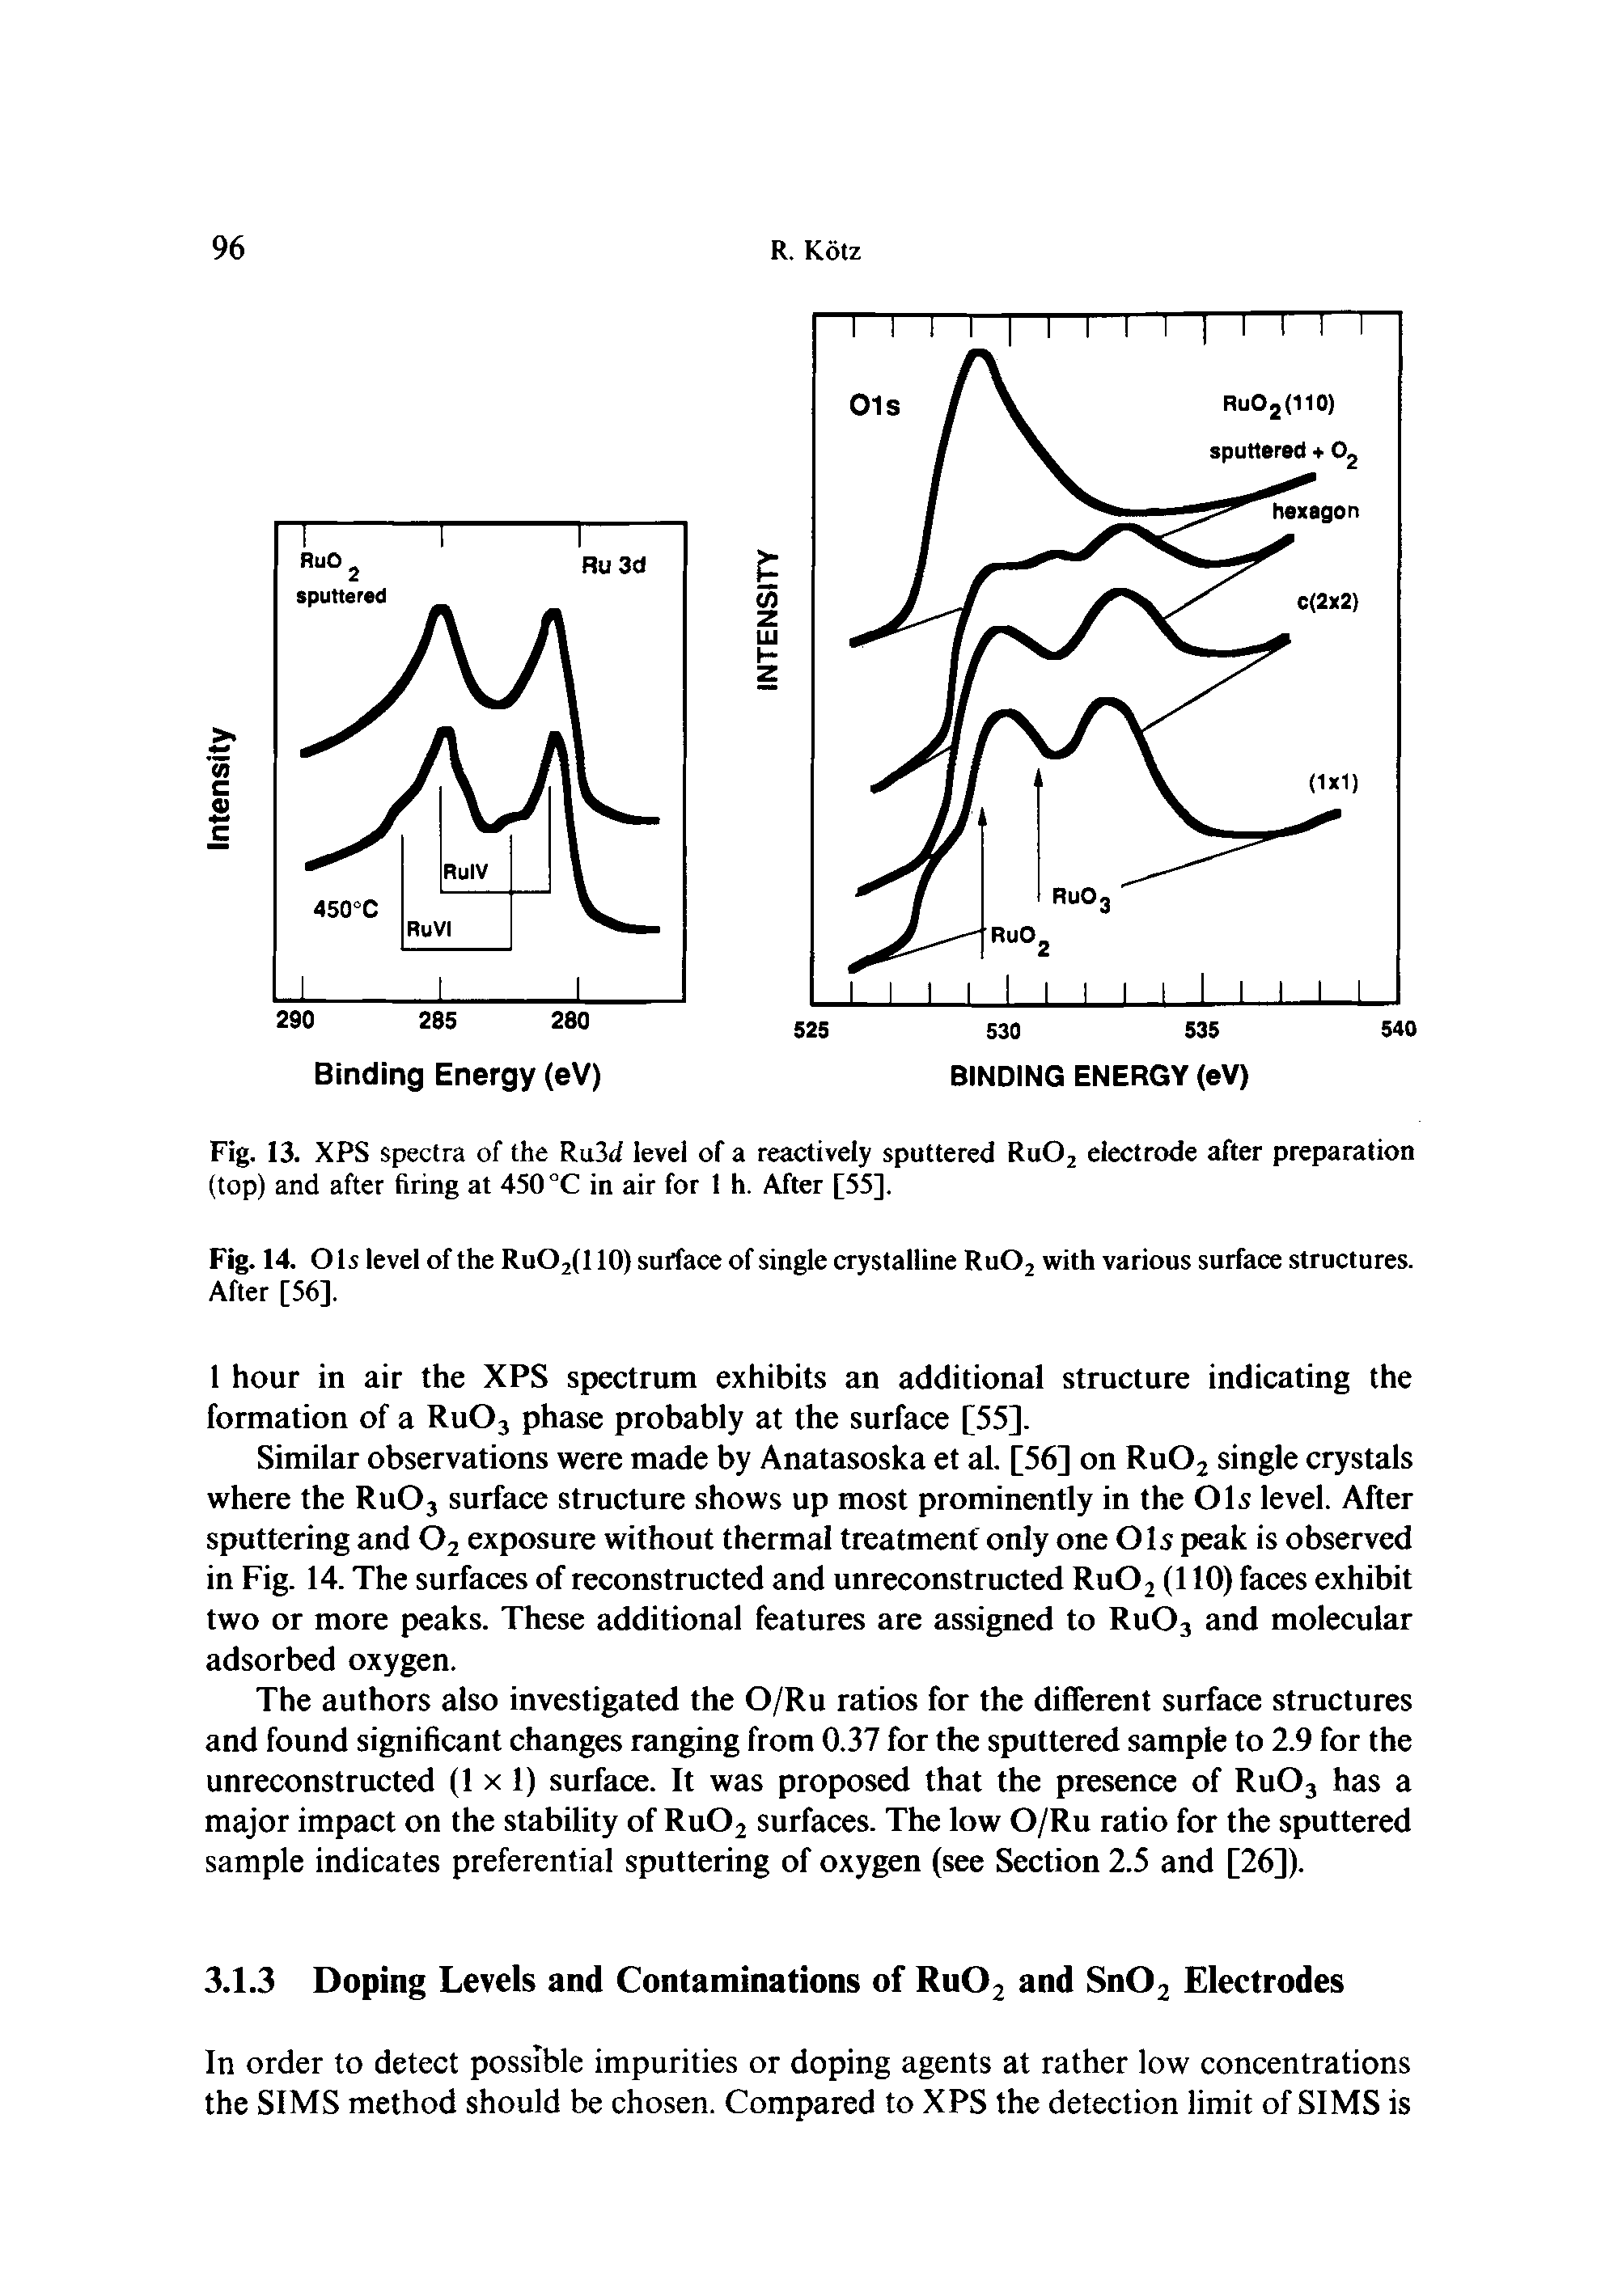 Fig. 13. XPS spectra of the Ru3d level of a reactively sputtered Ru02 electrode after preparation (top) and after firing at 450 °C in air for 1 h. After [55],...